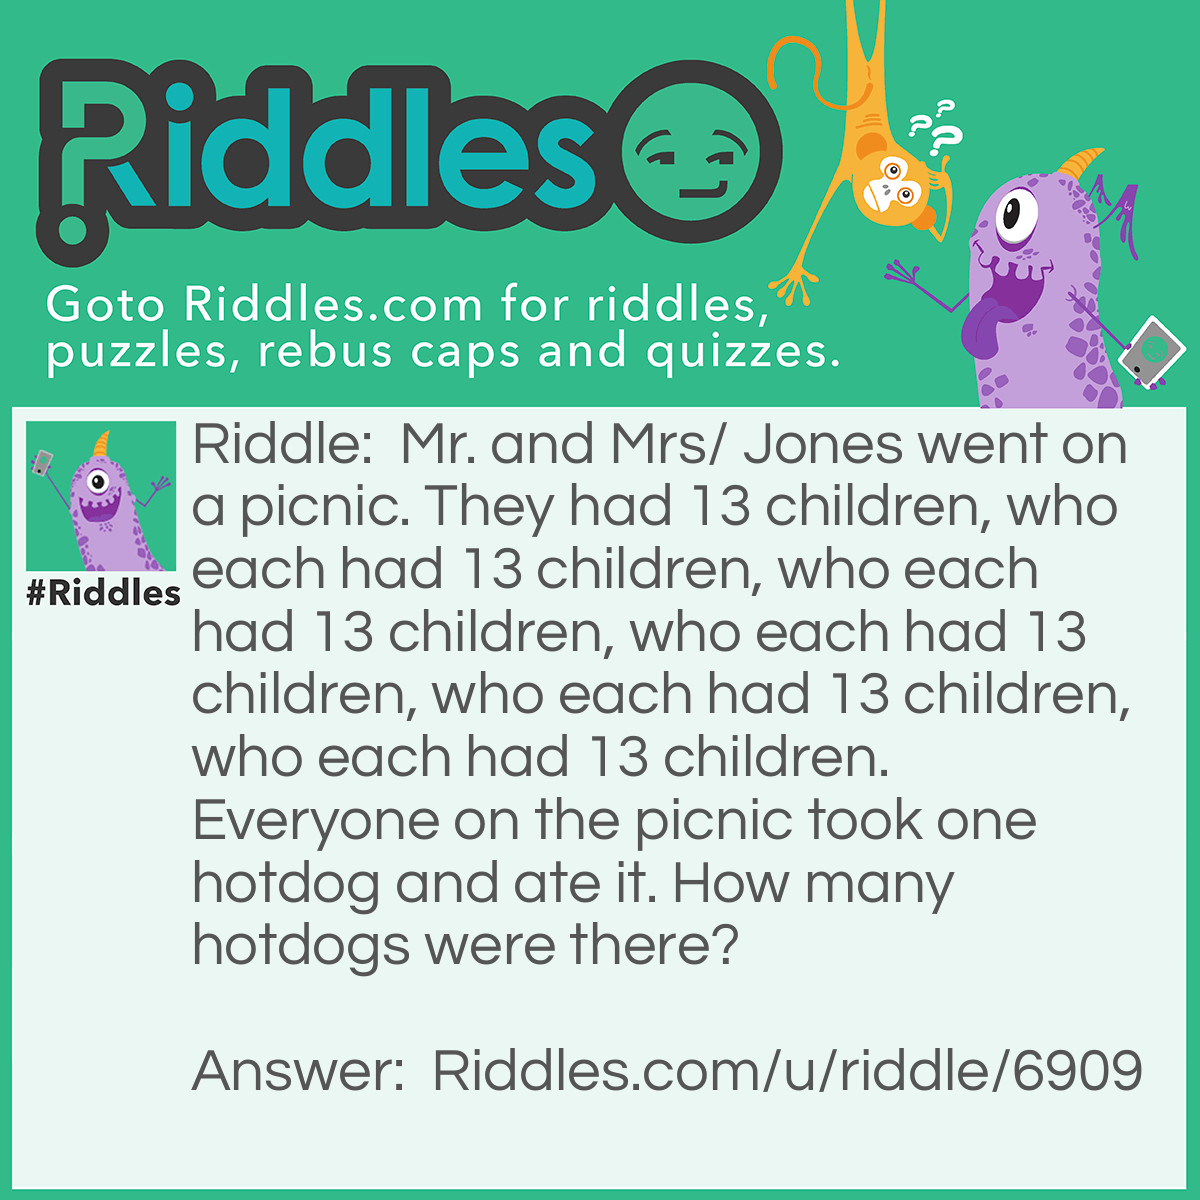 Riddle: Mr. and Mrs. Jones went on a picnic. They had 13 children, who each had 13 children, who each had 13 children, who each had 13 children, who each had 13 children, who each had 13 children. Everyone on the picnic took one hotdog and ate it. How many hotdogs were there? Answer: 2.